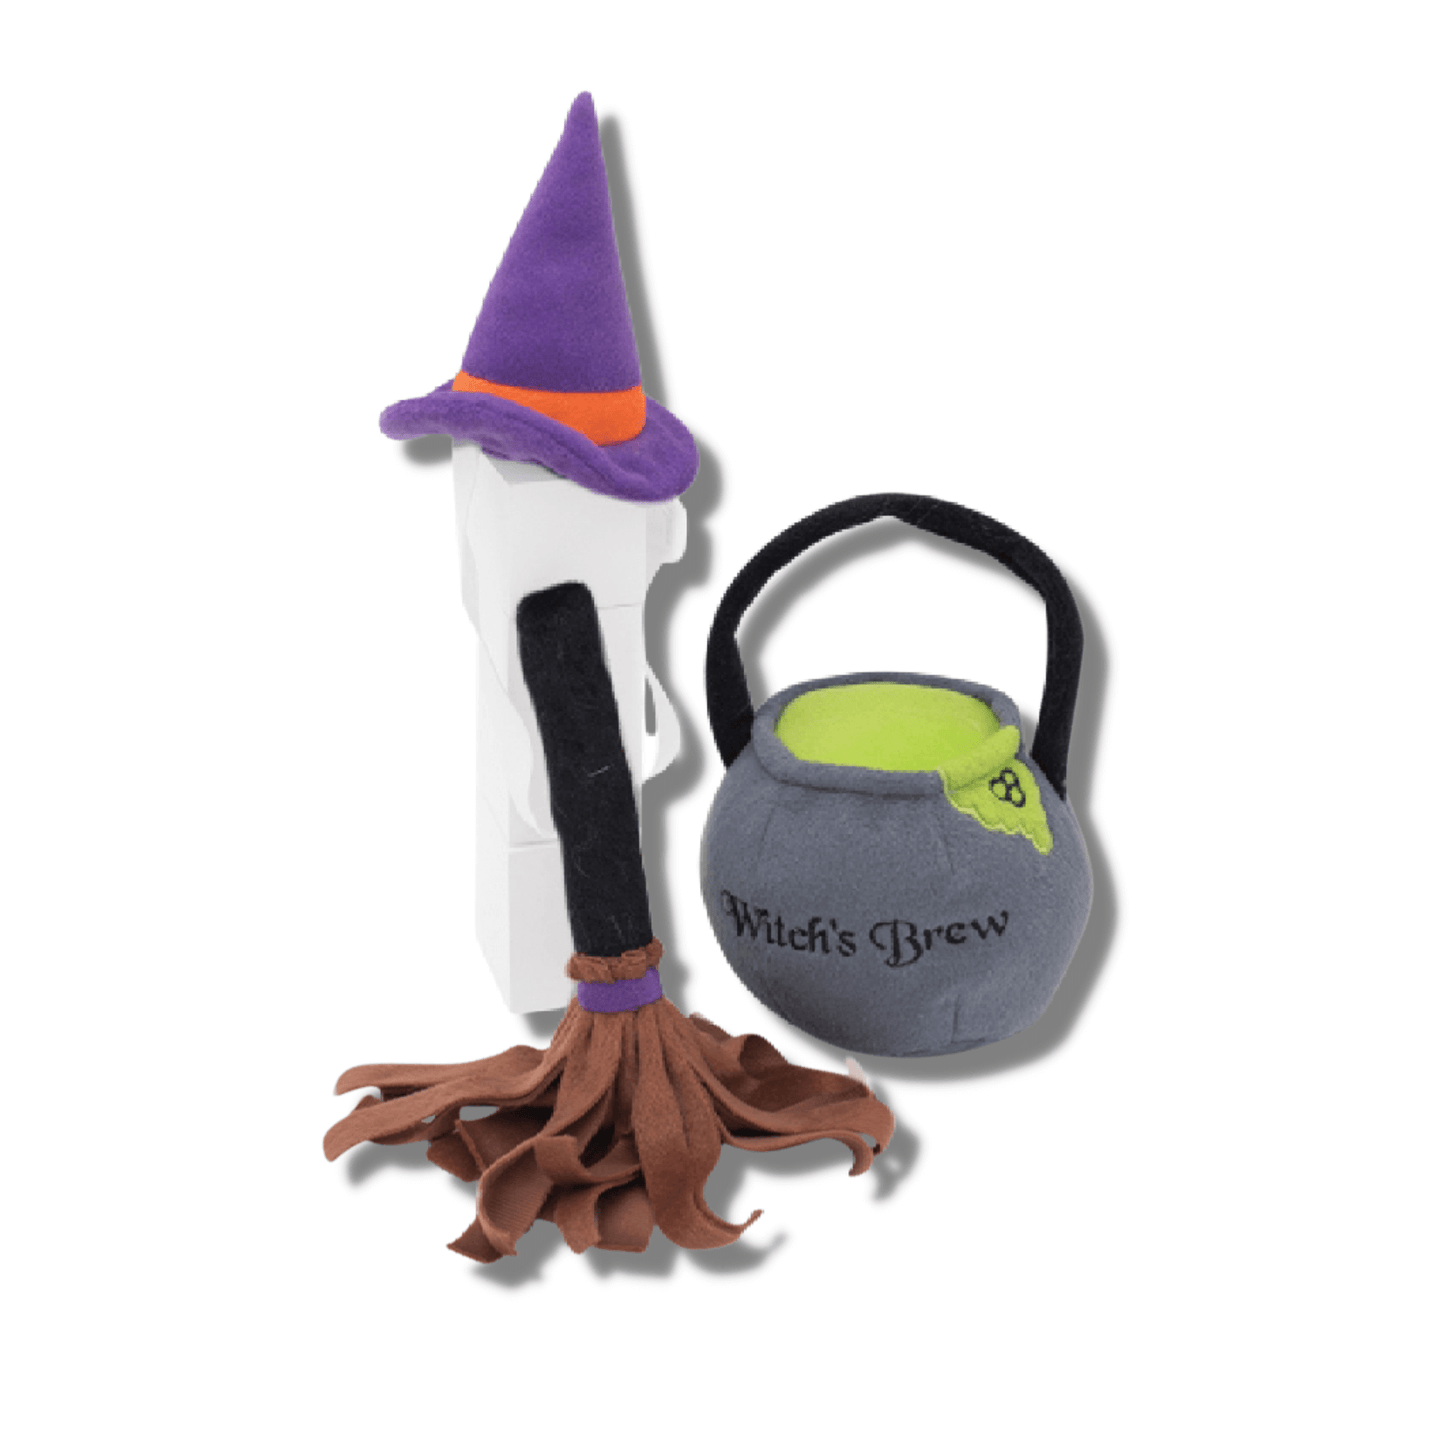 Halloween witch dog costume kit with hat and dog toys